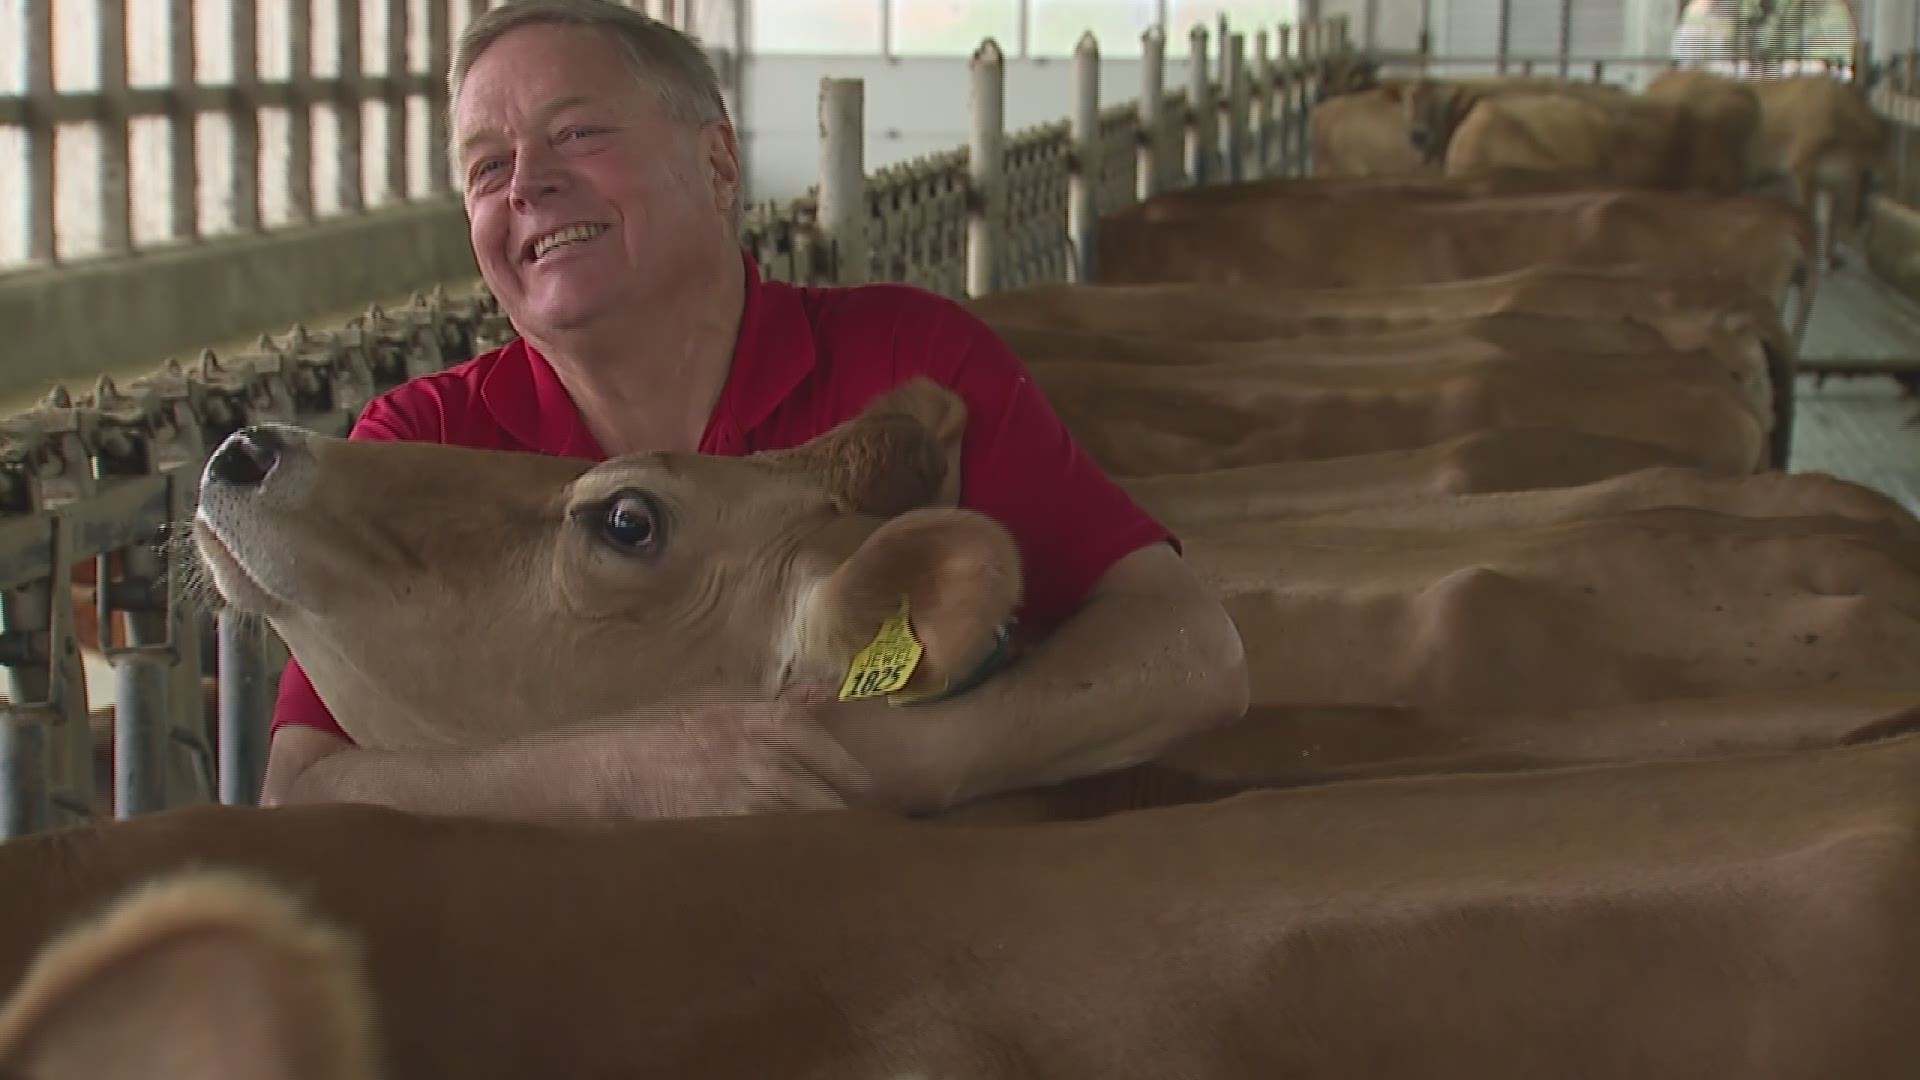 Cow hugging wellness trend spreads across the nation